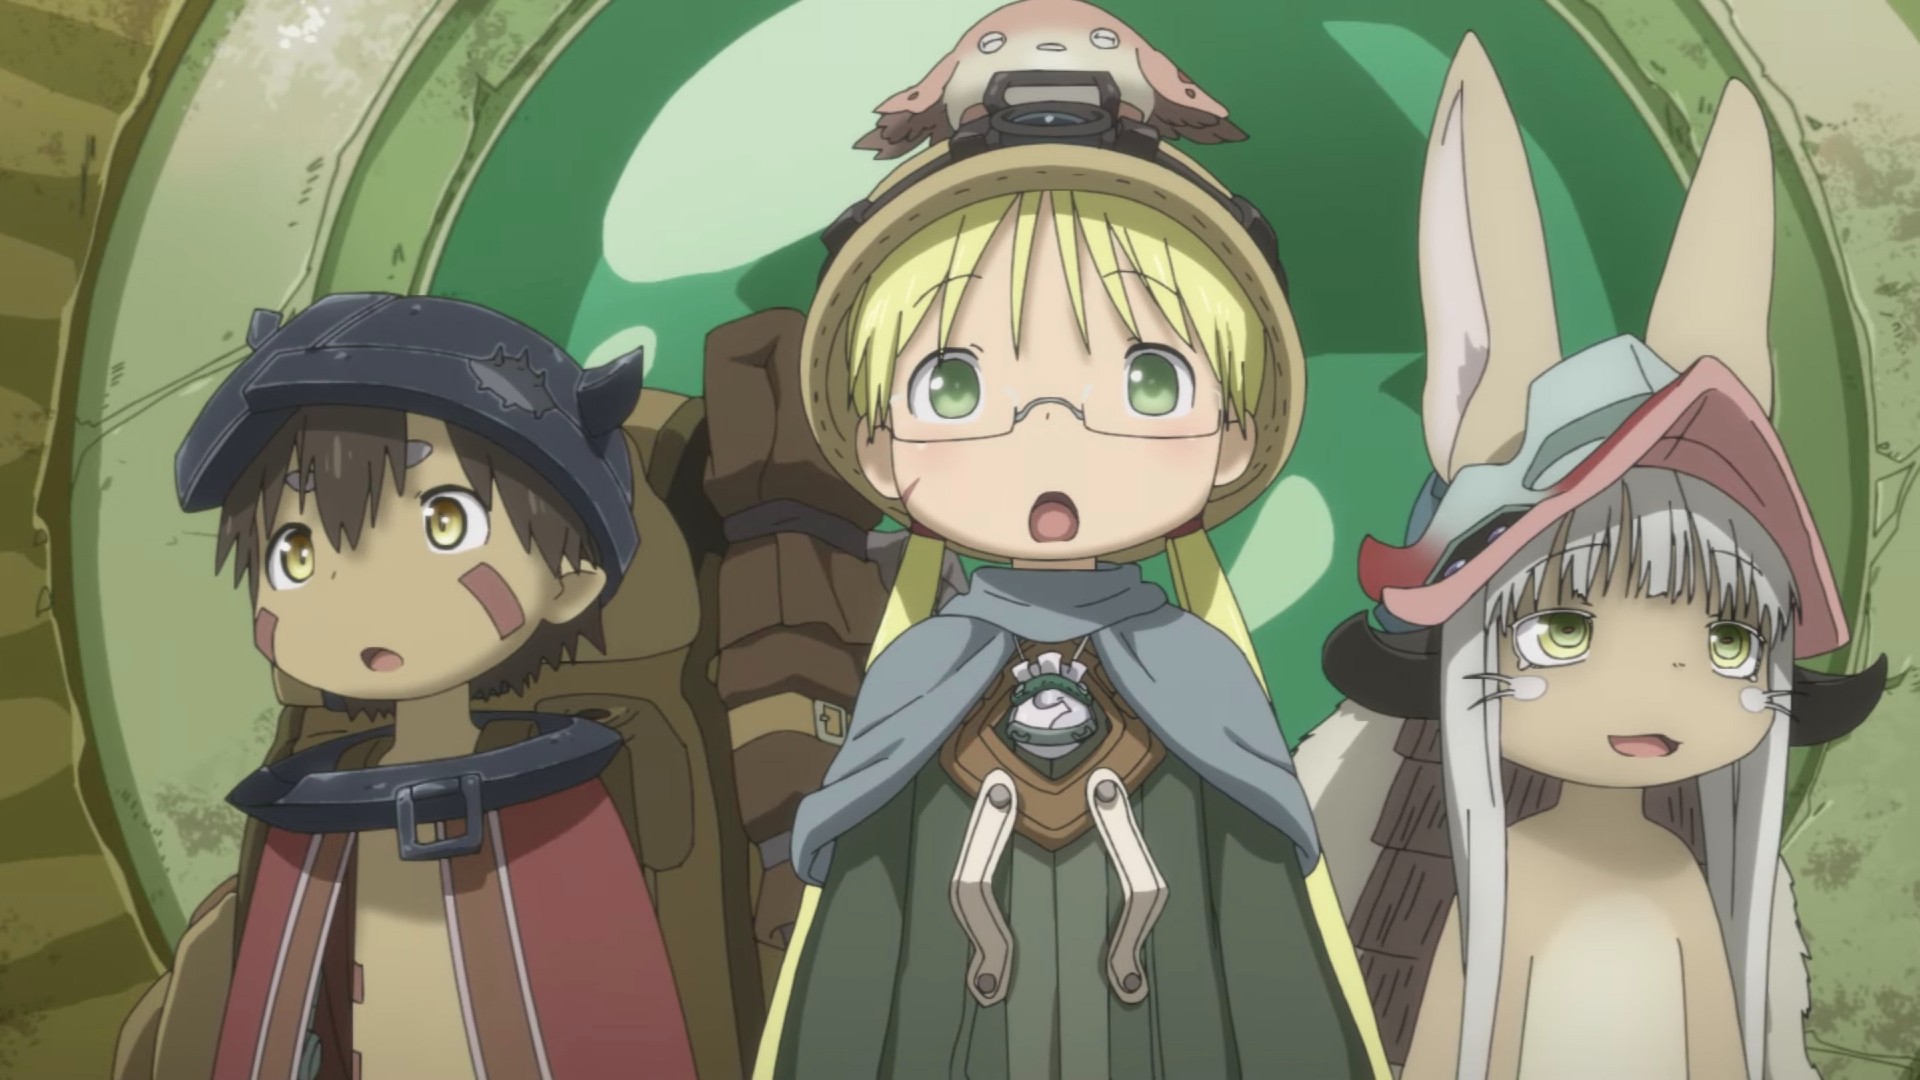 Made in Abyss, the popular anime series based on the manga of the same name, has captivated audiences with its unique blend of adventure, fantasy, and mystery.